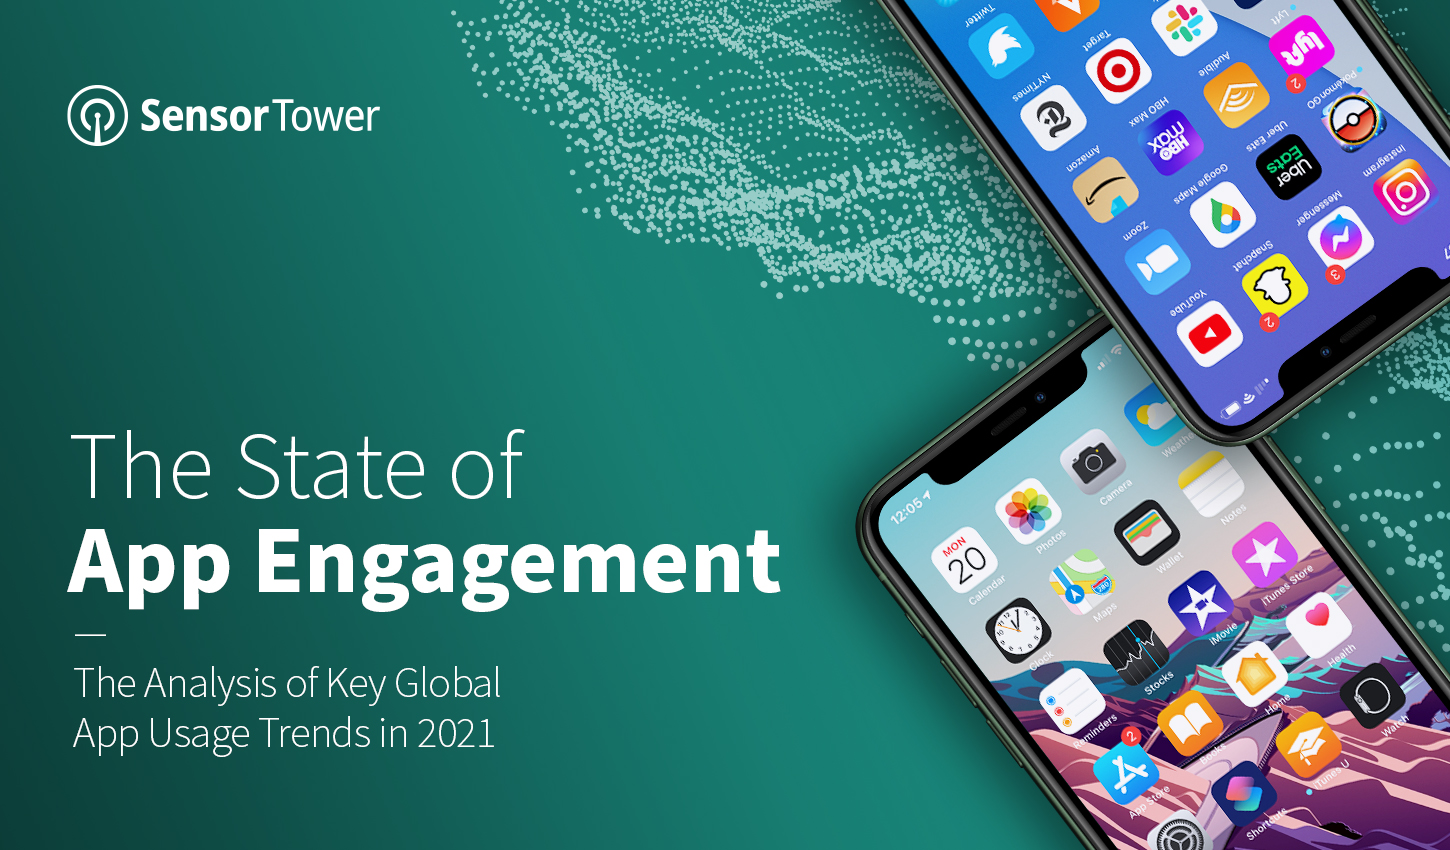 Takeaways from Sensor Tower's State of App Engagement 2021 Report